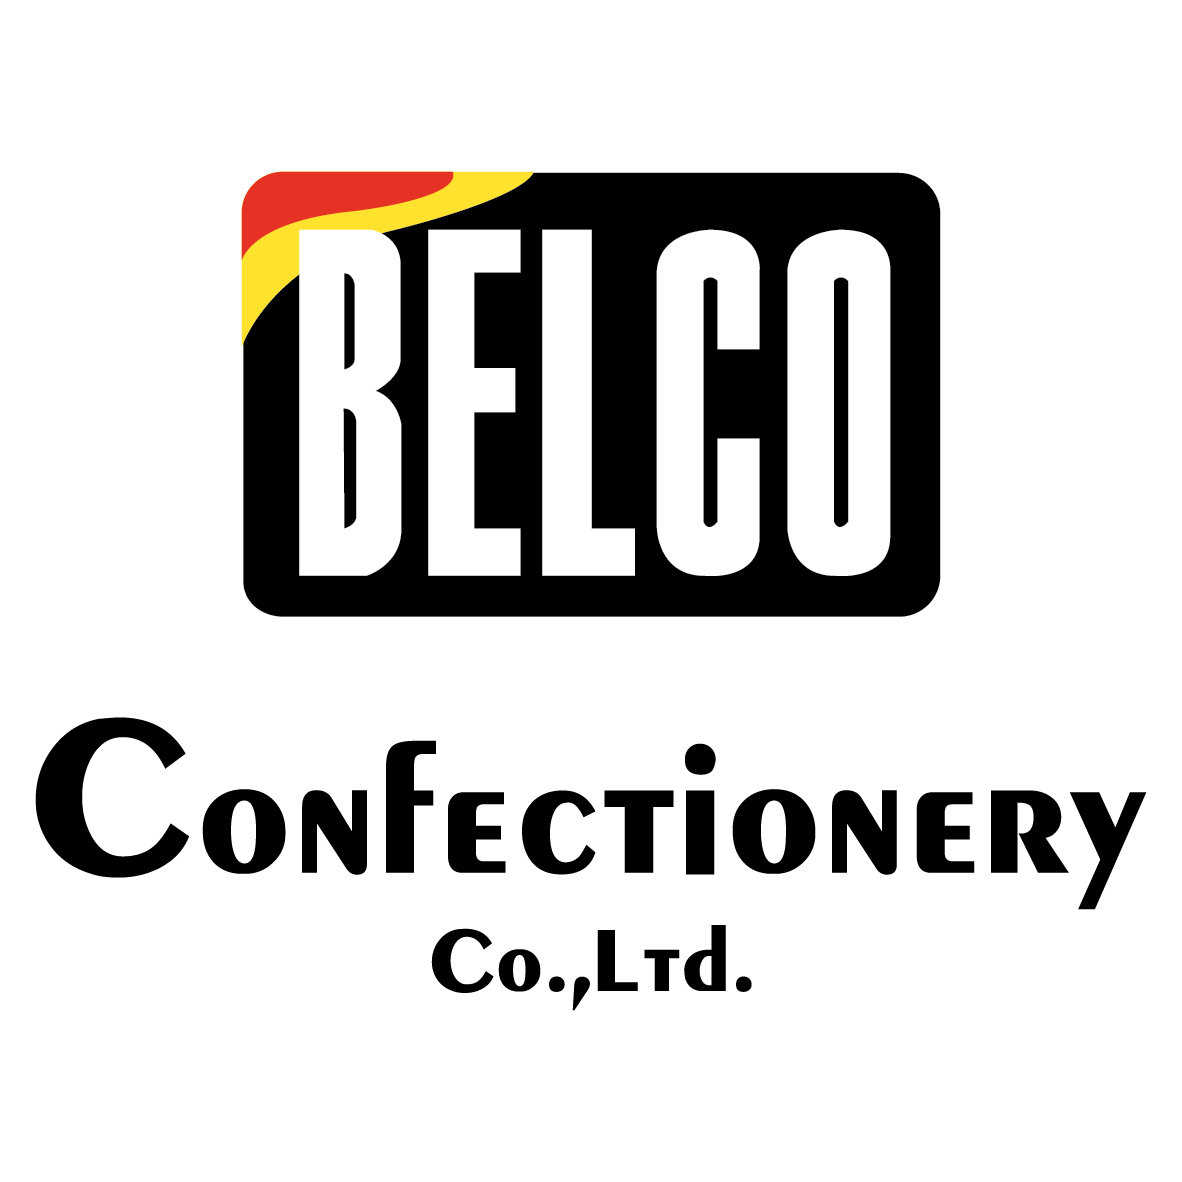 Belco Confectionery Co.,Ltd.